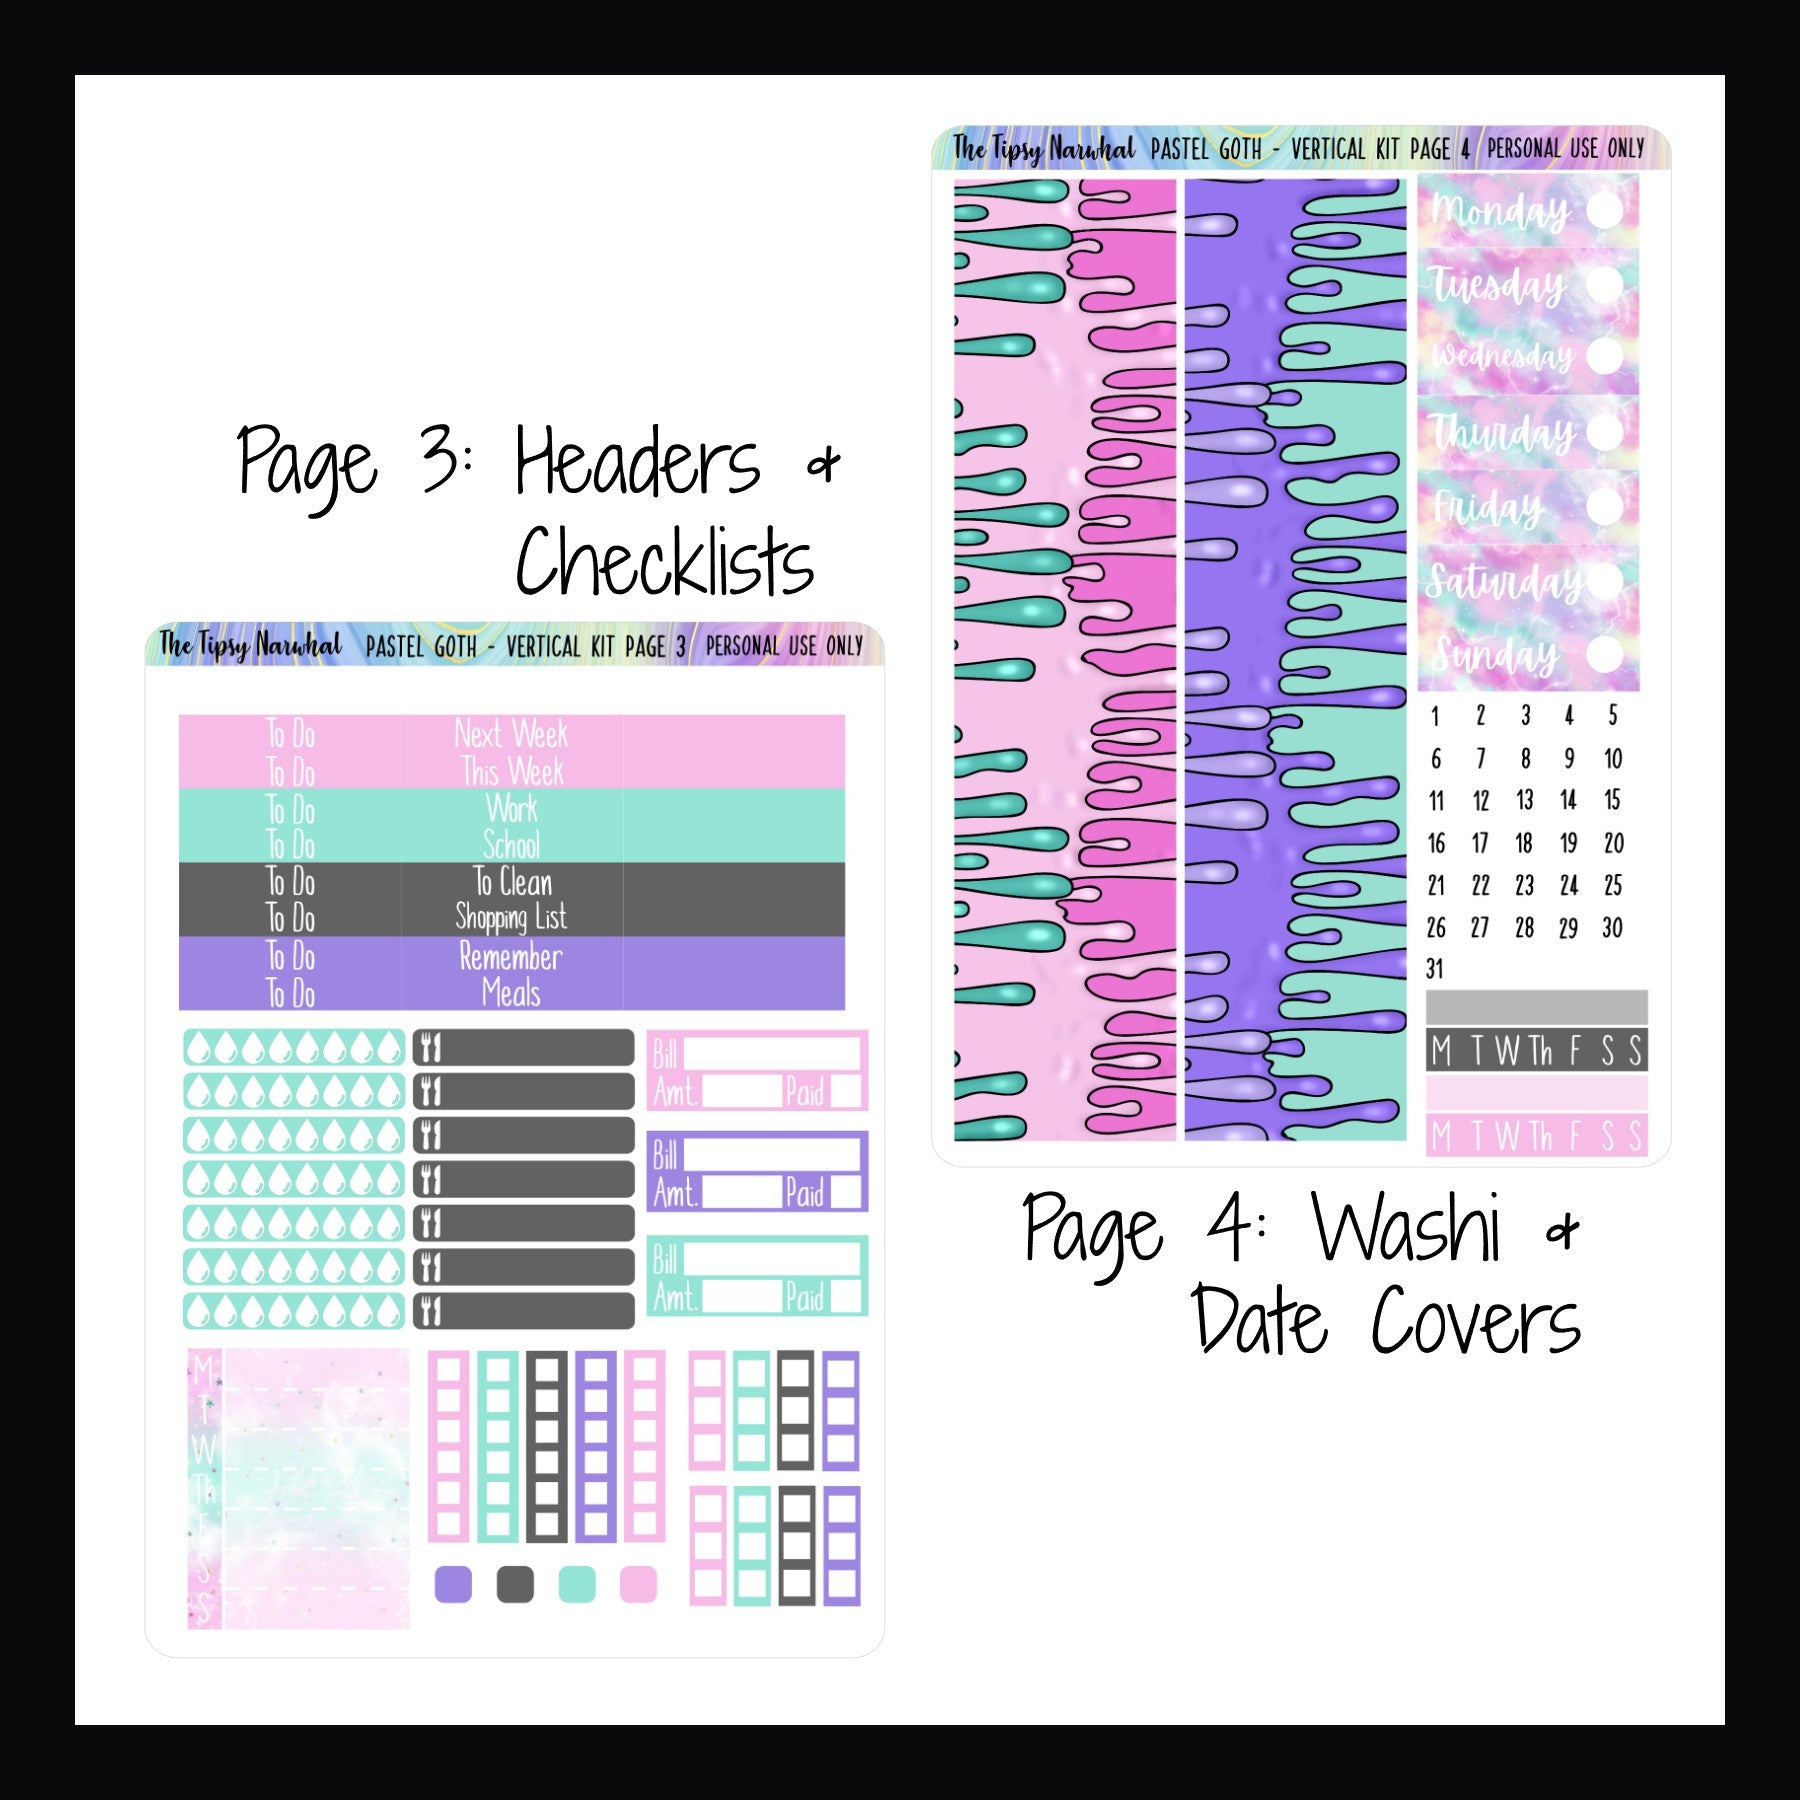 Digital Pastel Goth Vertical Kit pages 3 and 4.  Page 3 features header stickers, water tracking stickers, meal tracking, bill tracking, checklist stickers and a full week sticker.  Page 4 features full sized washi strips, date covers and habit trackers. 